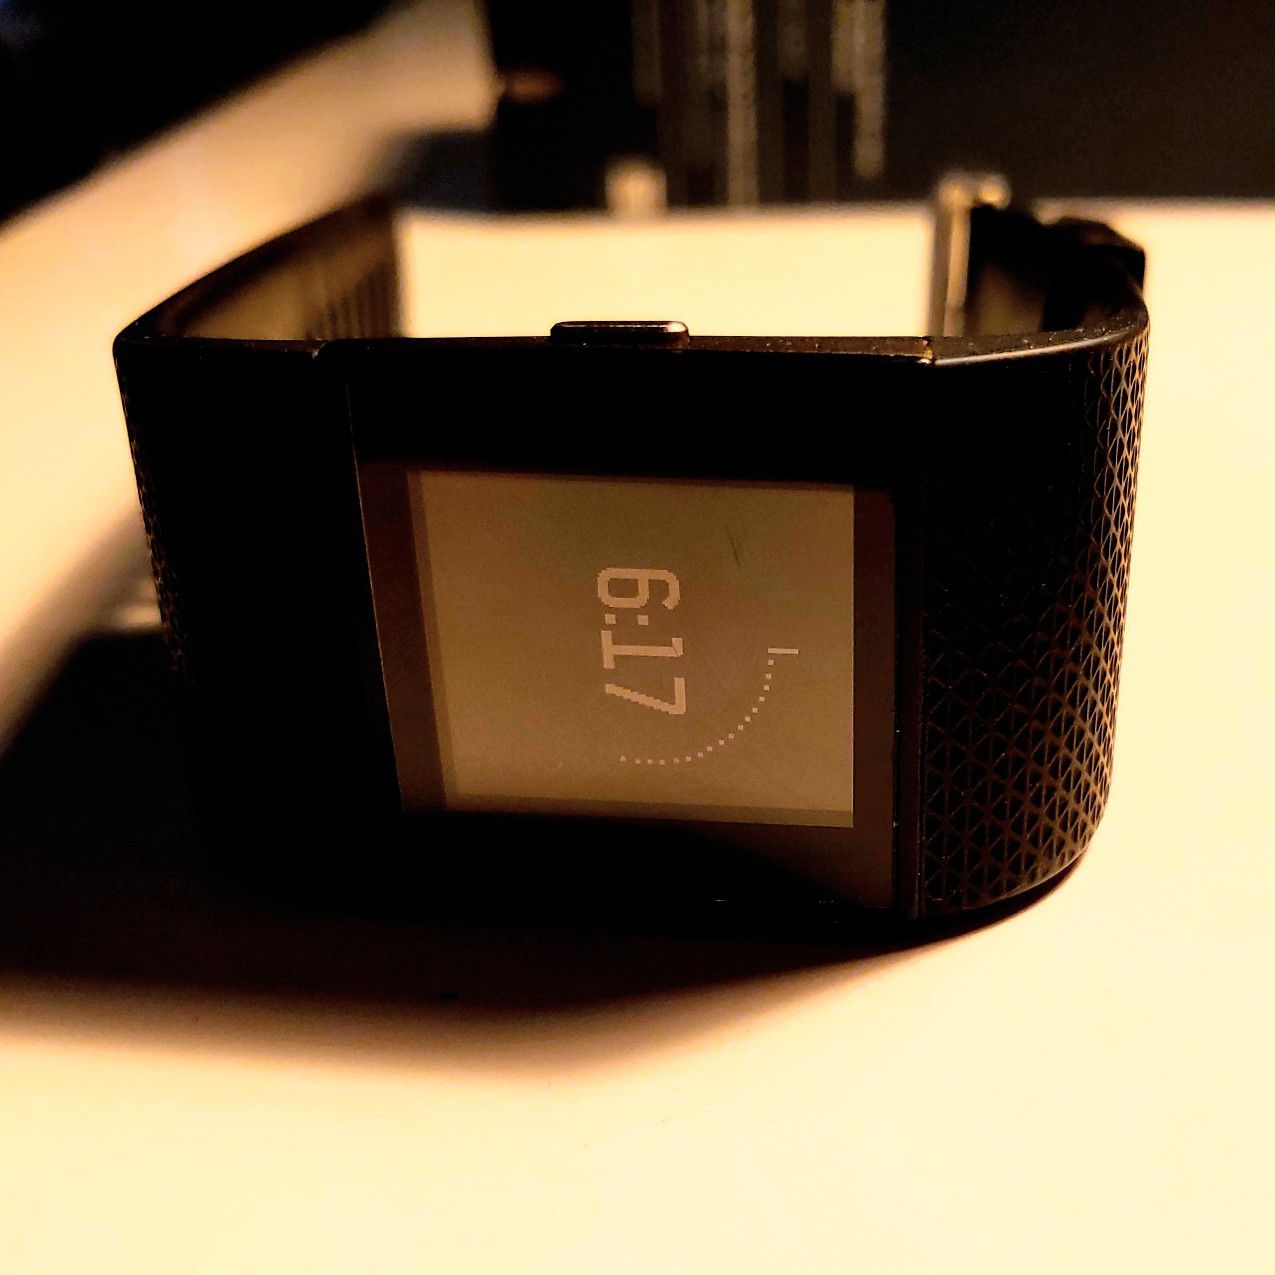 Fitbit Surge with charger